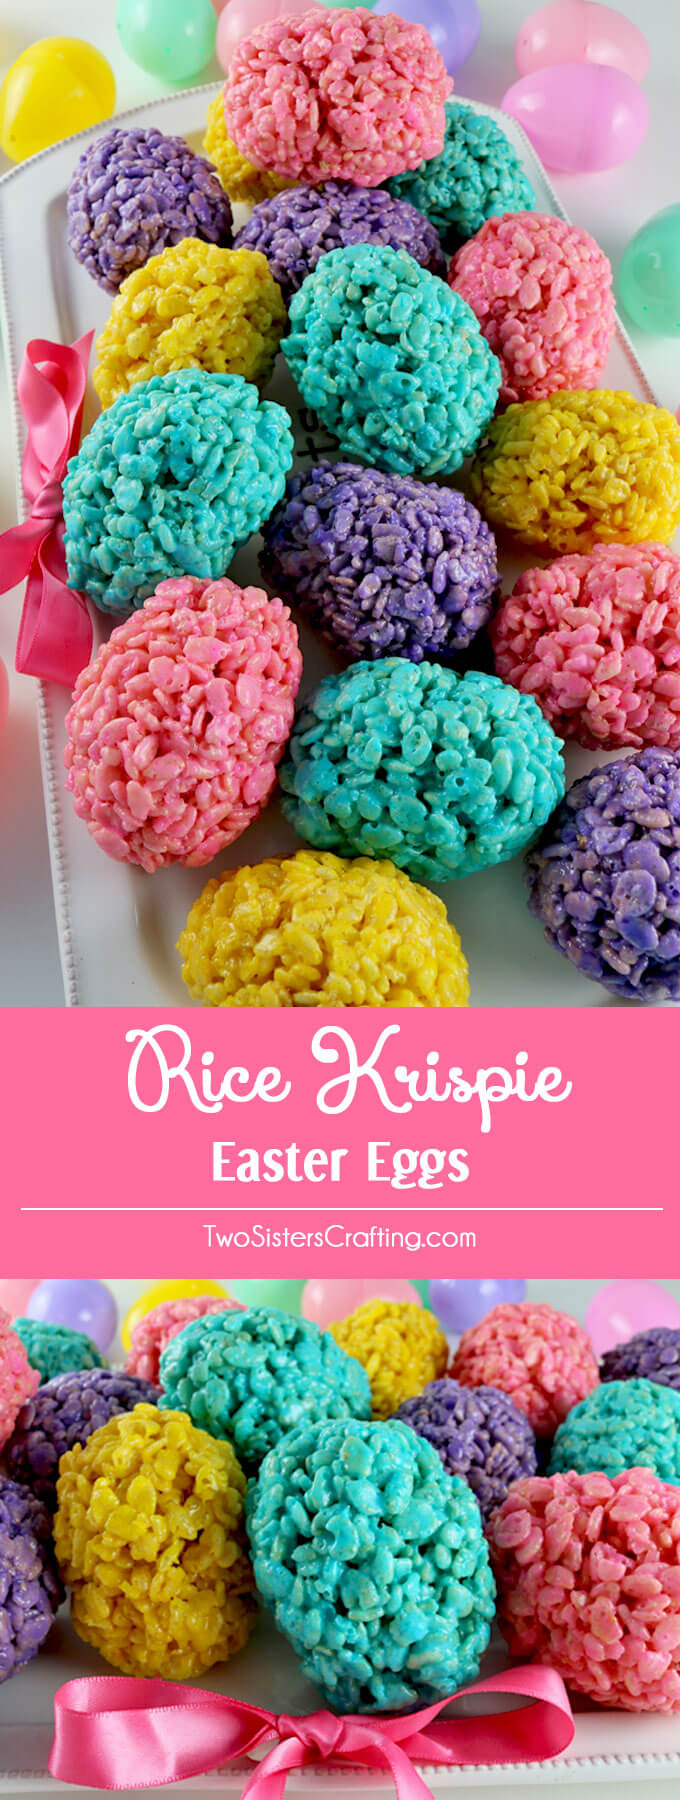 rice krispie Easter eggs + 25 Easter Crafts for Kids - Fun-filled Easter activities for you and your child to do together!